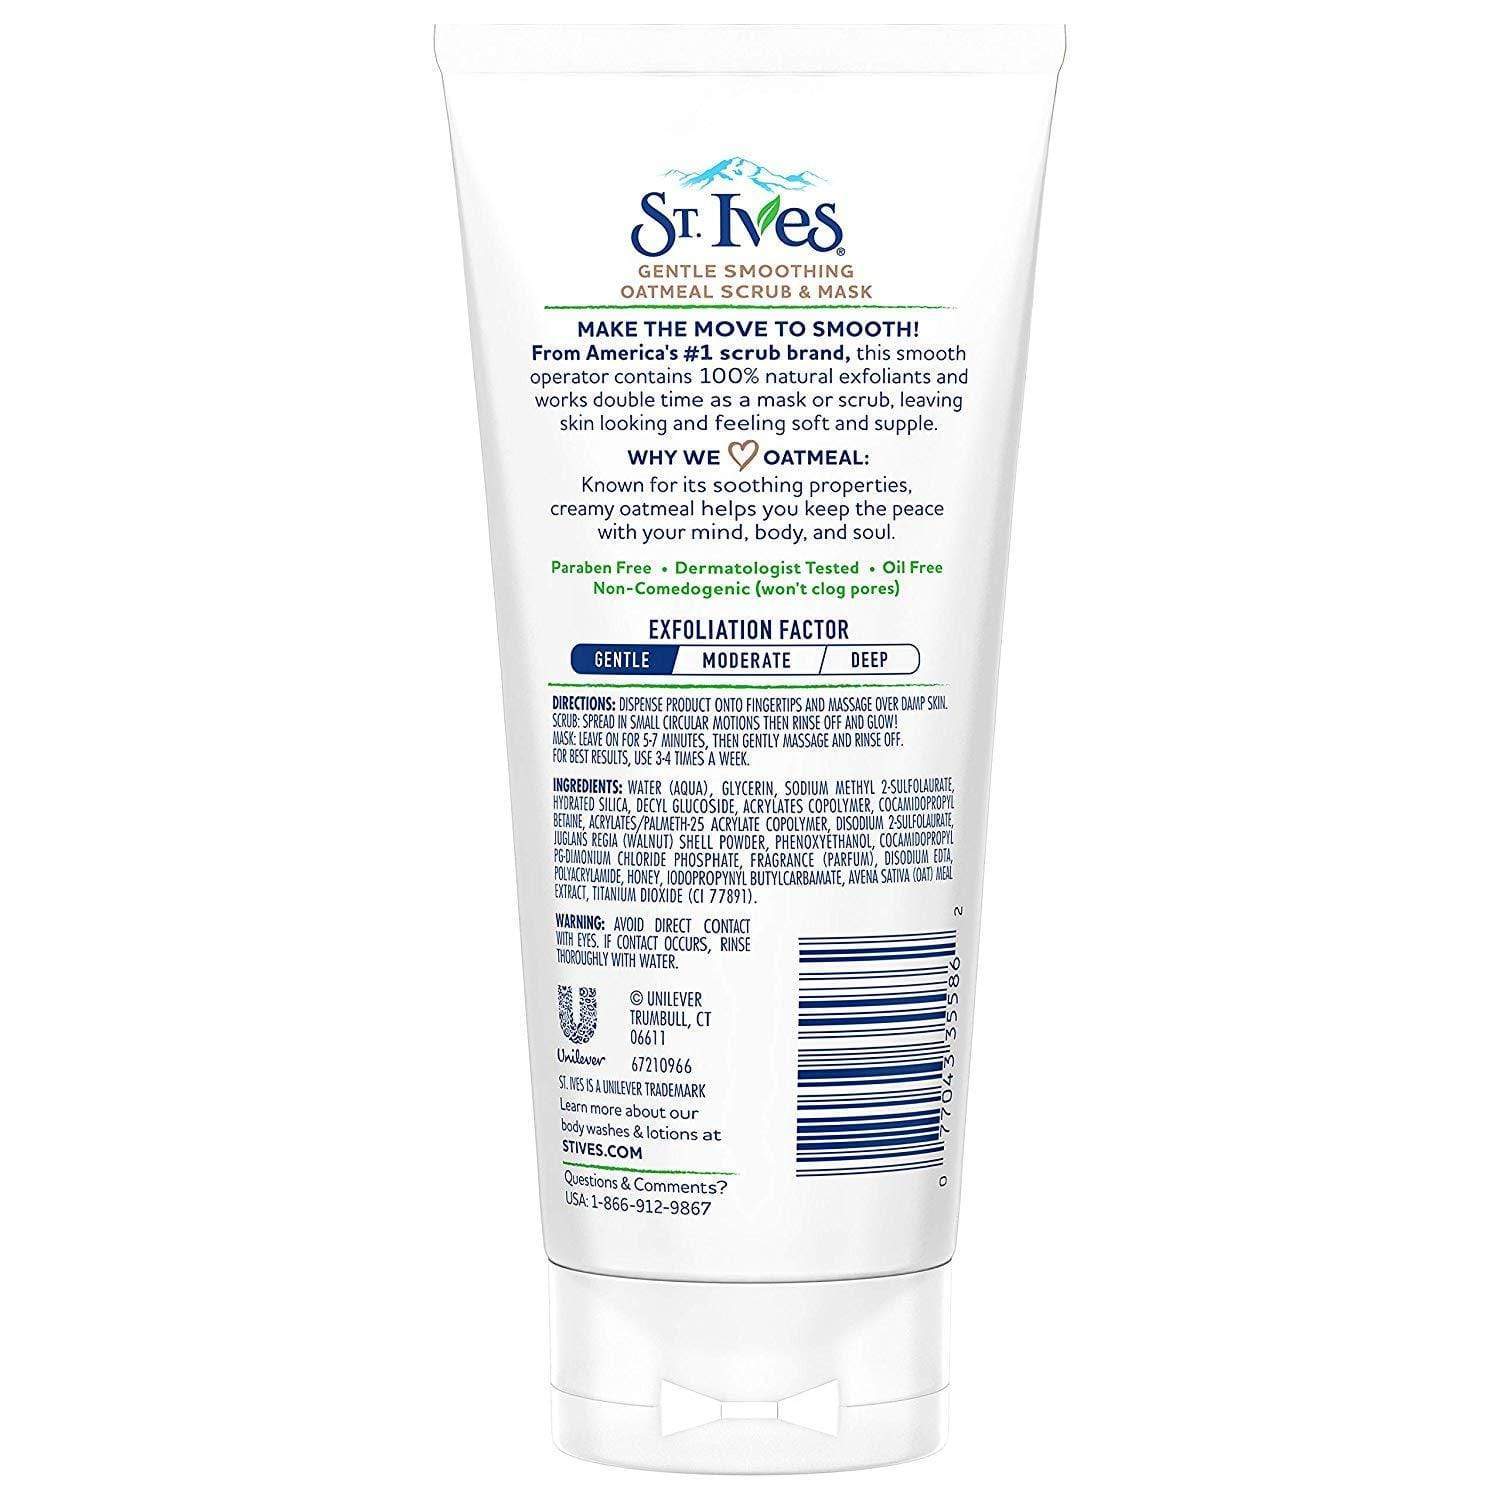 St Ives Gentle Smoothing Face Scrub and Mask, Oatmeal Minoustore